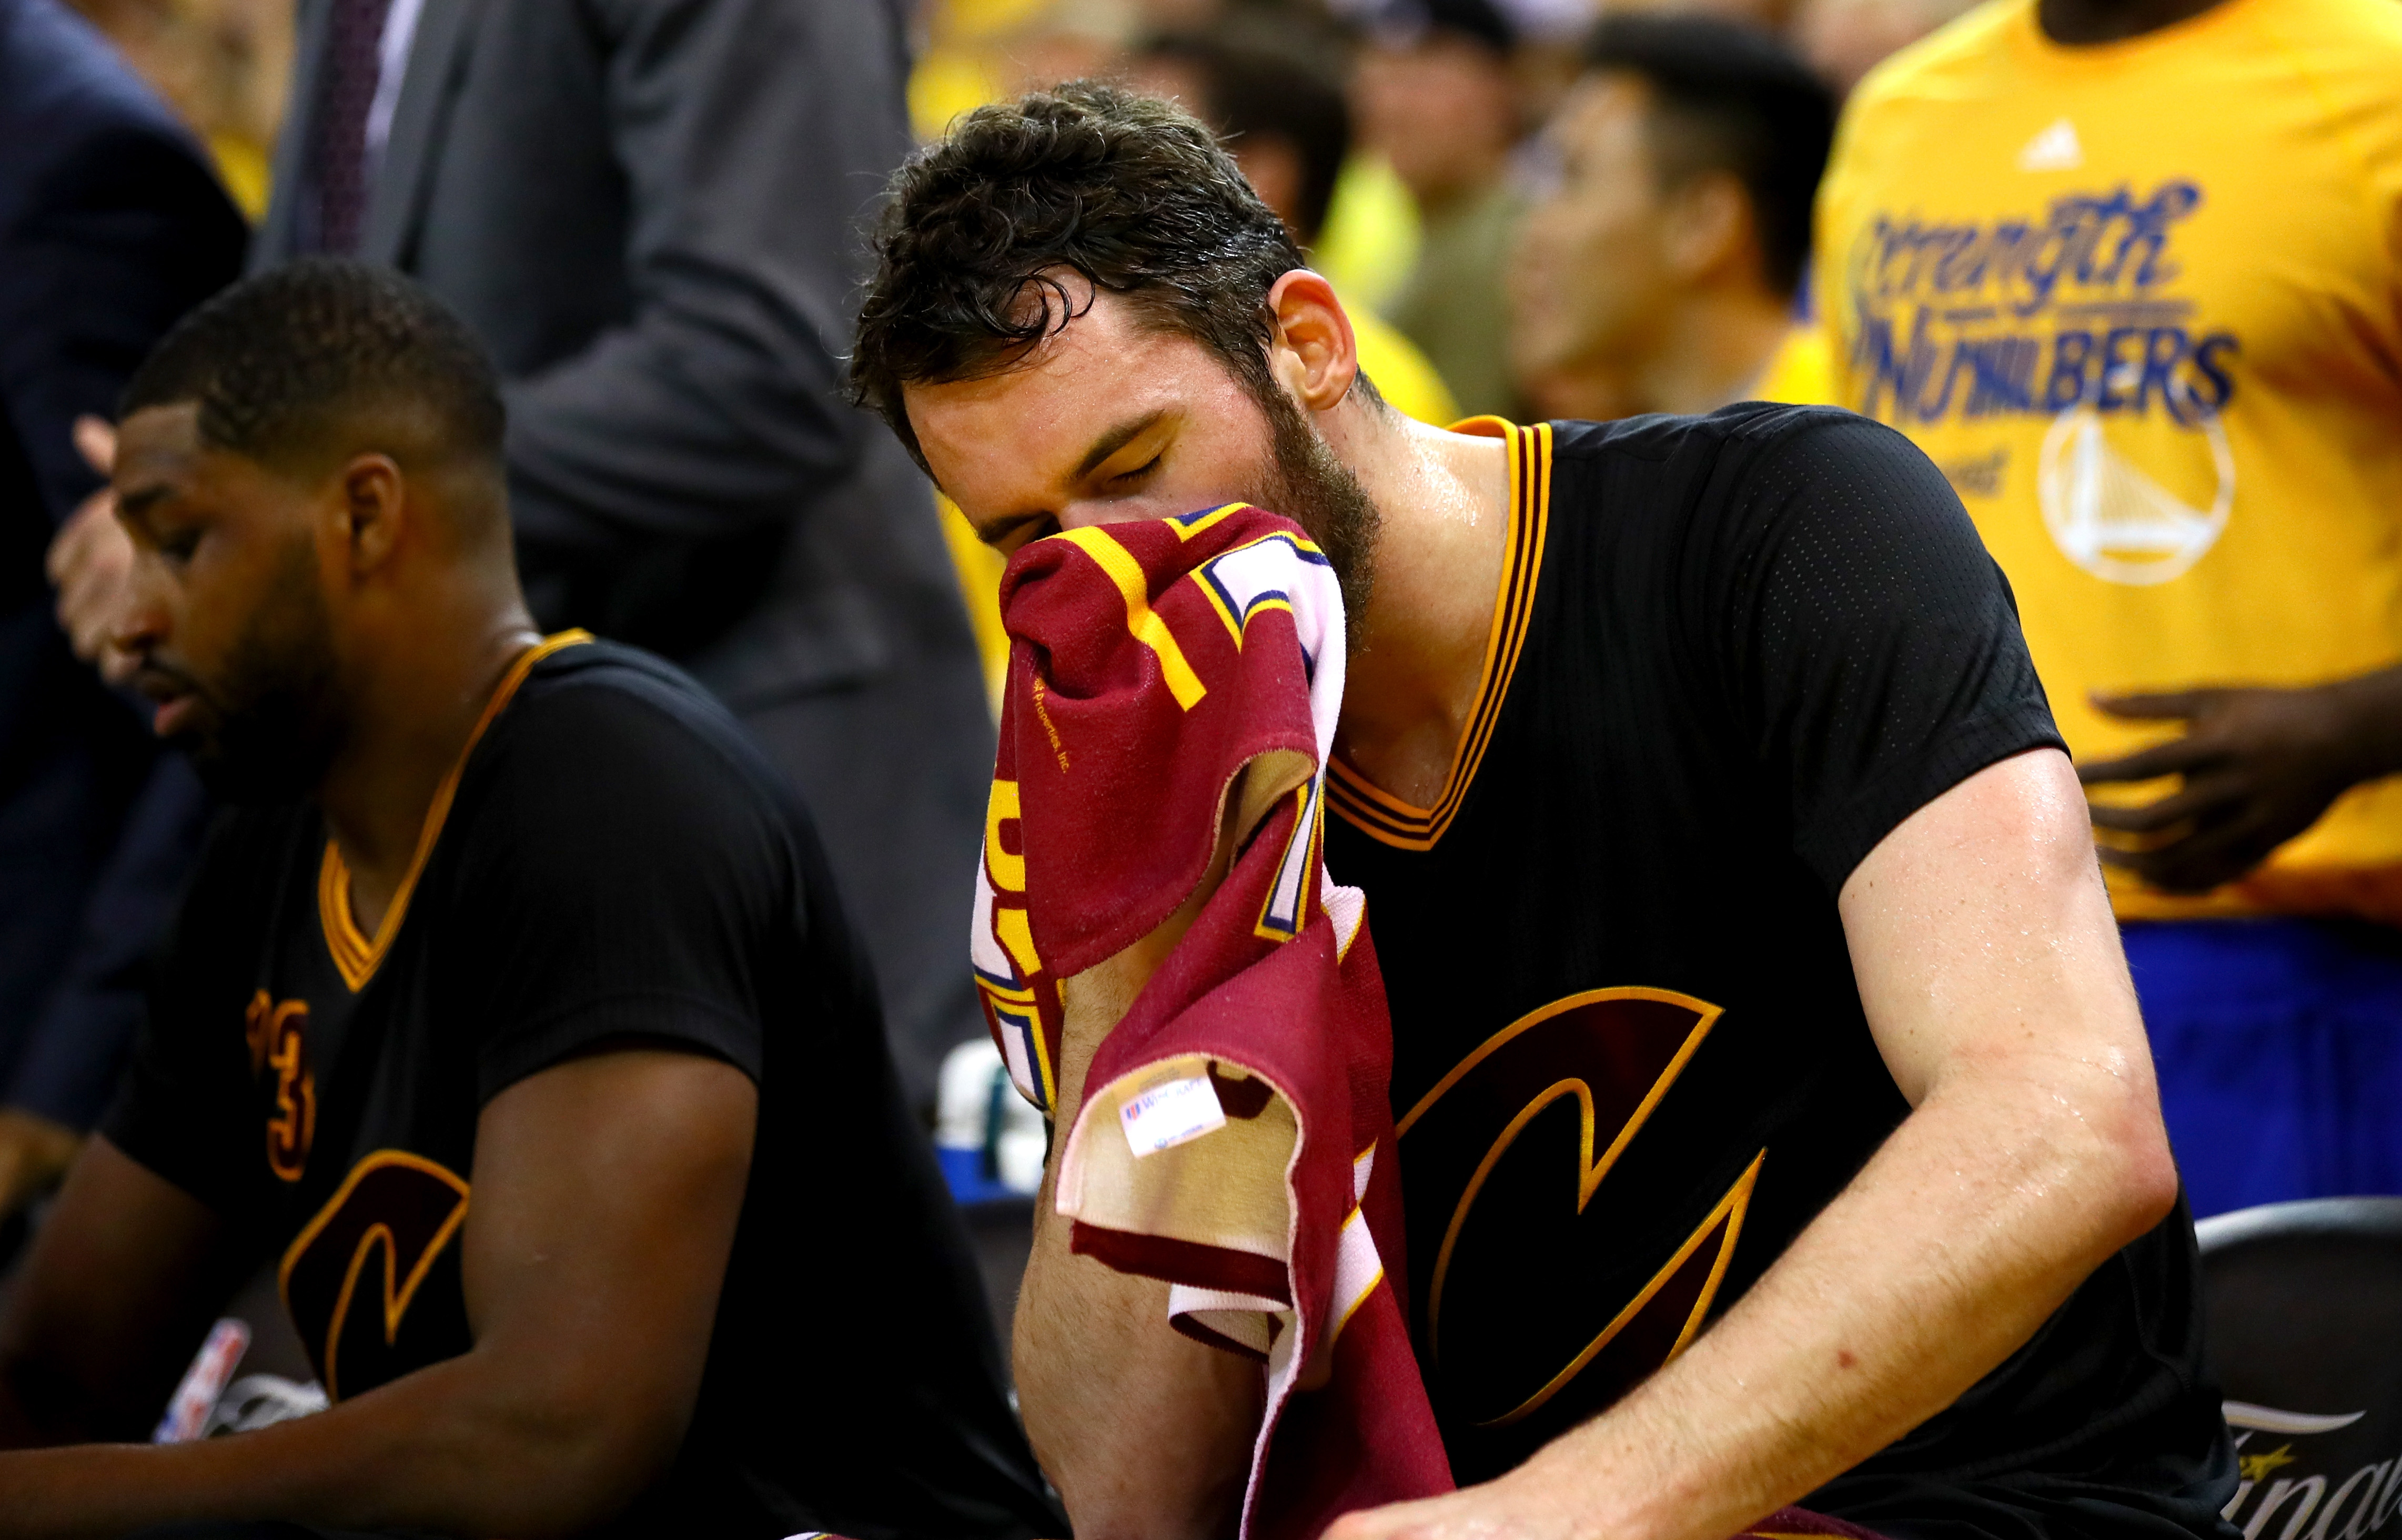 Kevin Love reacts during Game 7 of the 2016 NBA Finals between the Cleveland Cavaliers and Golden State Warriors